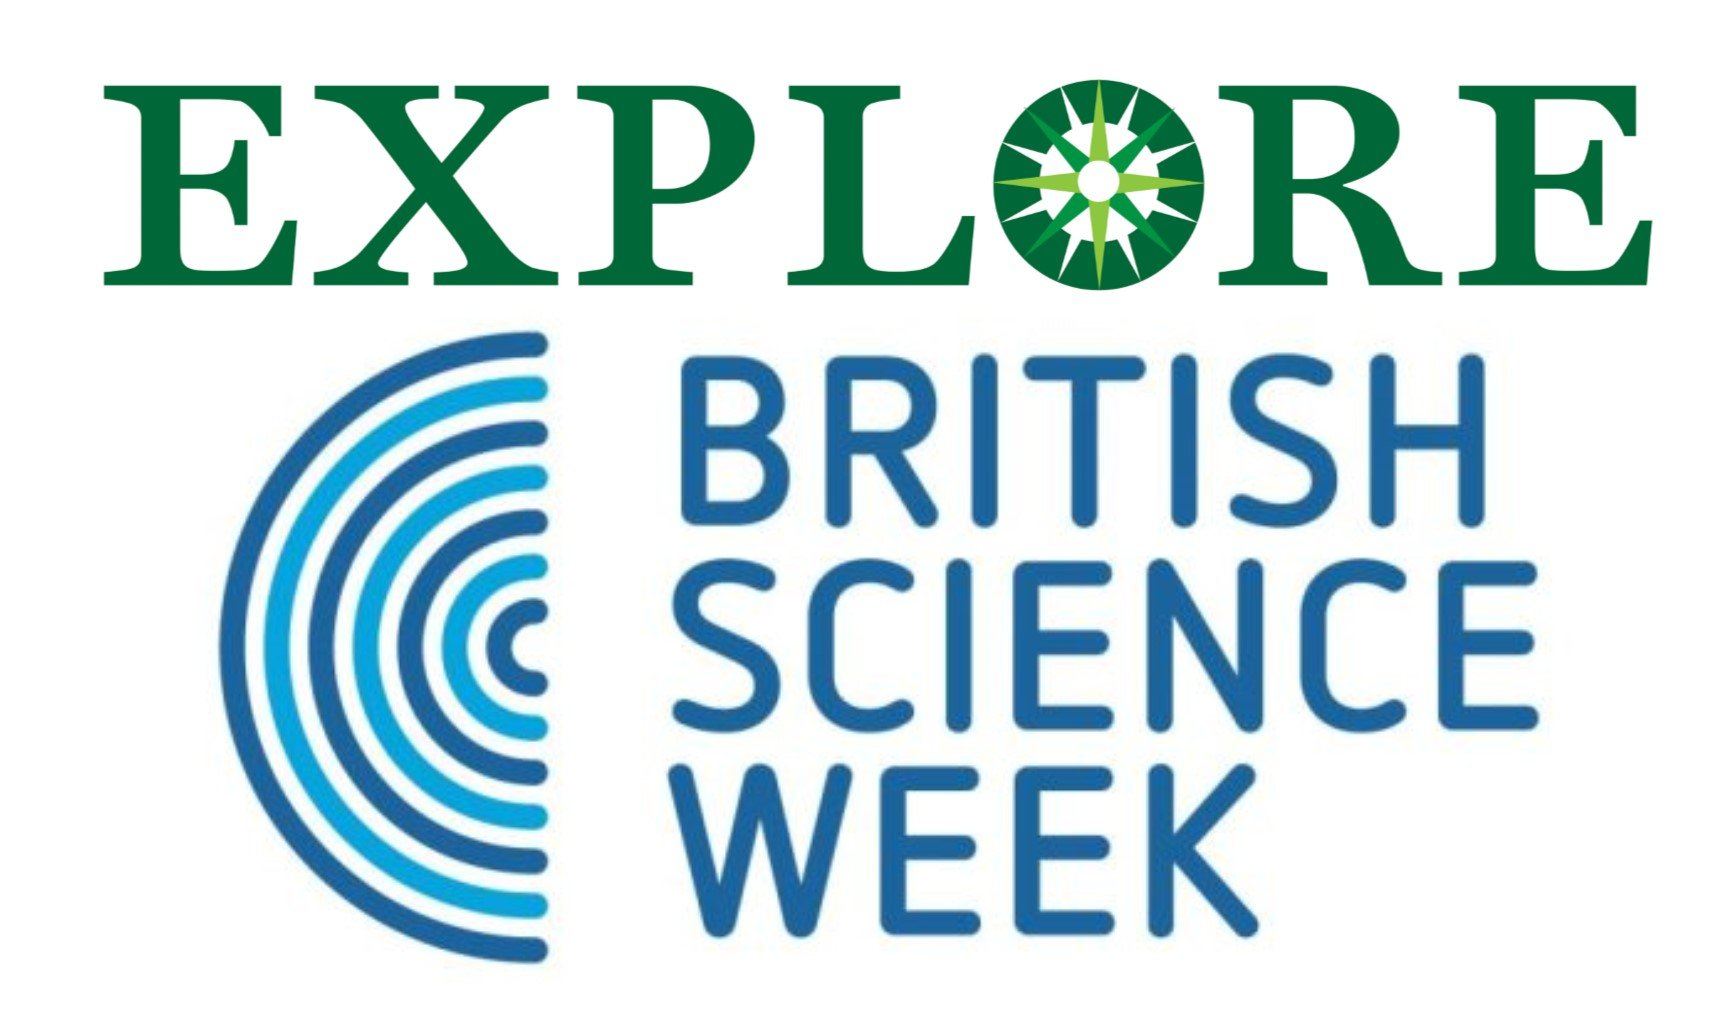 Explore lifelong learning 2020 Our Diverse Planet British Science Week 2020 adult education